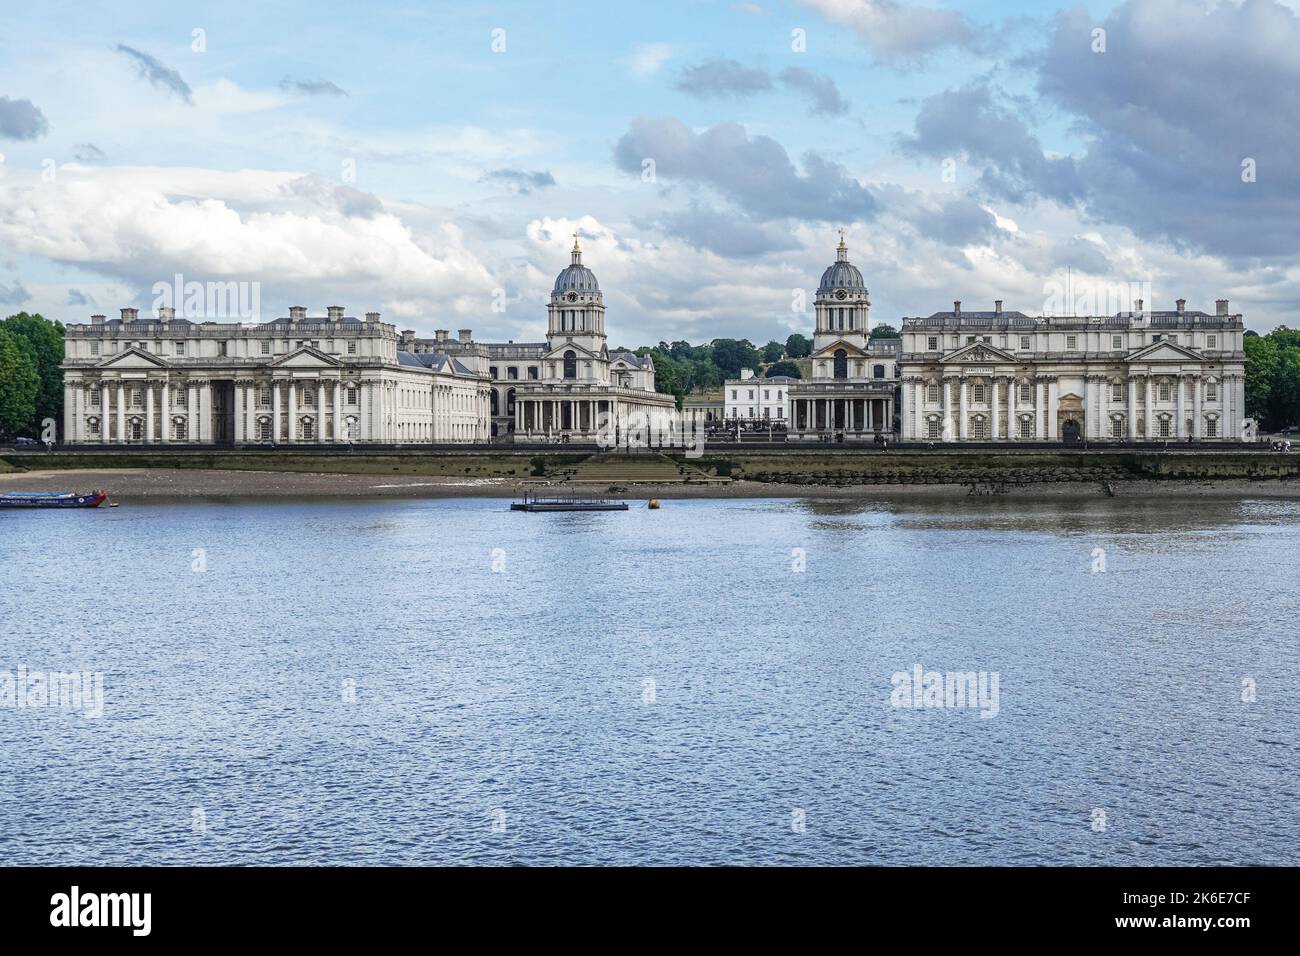 The University of Greenwich, the Old Royal Naval College on the south bank of the river Thames in Greenwich, London England United Kingdom UK Stock Photo